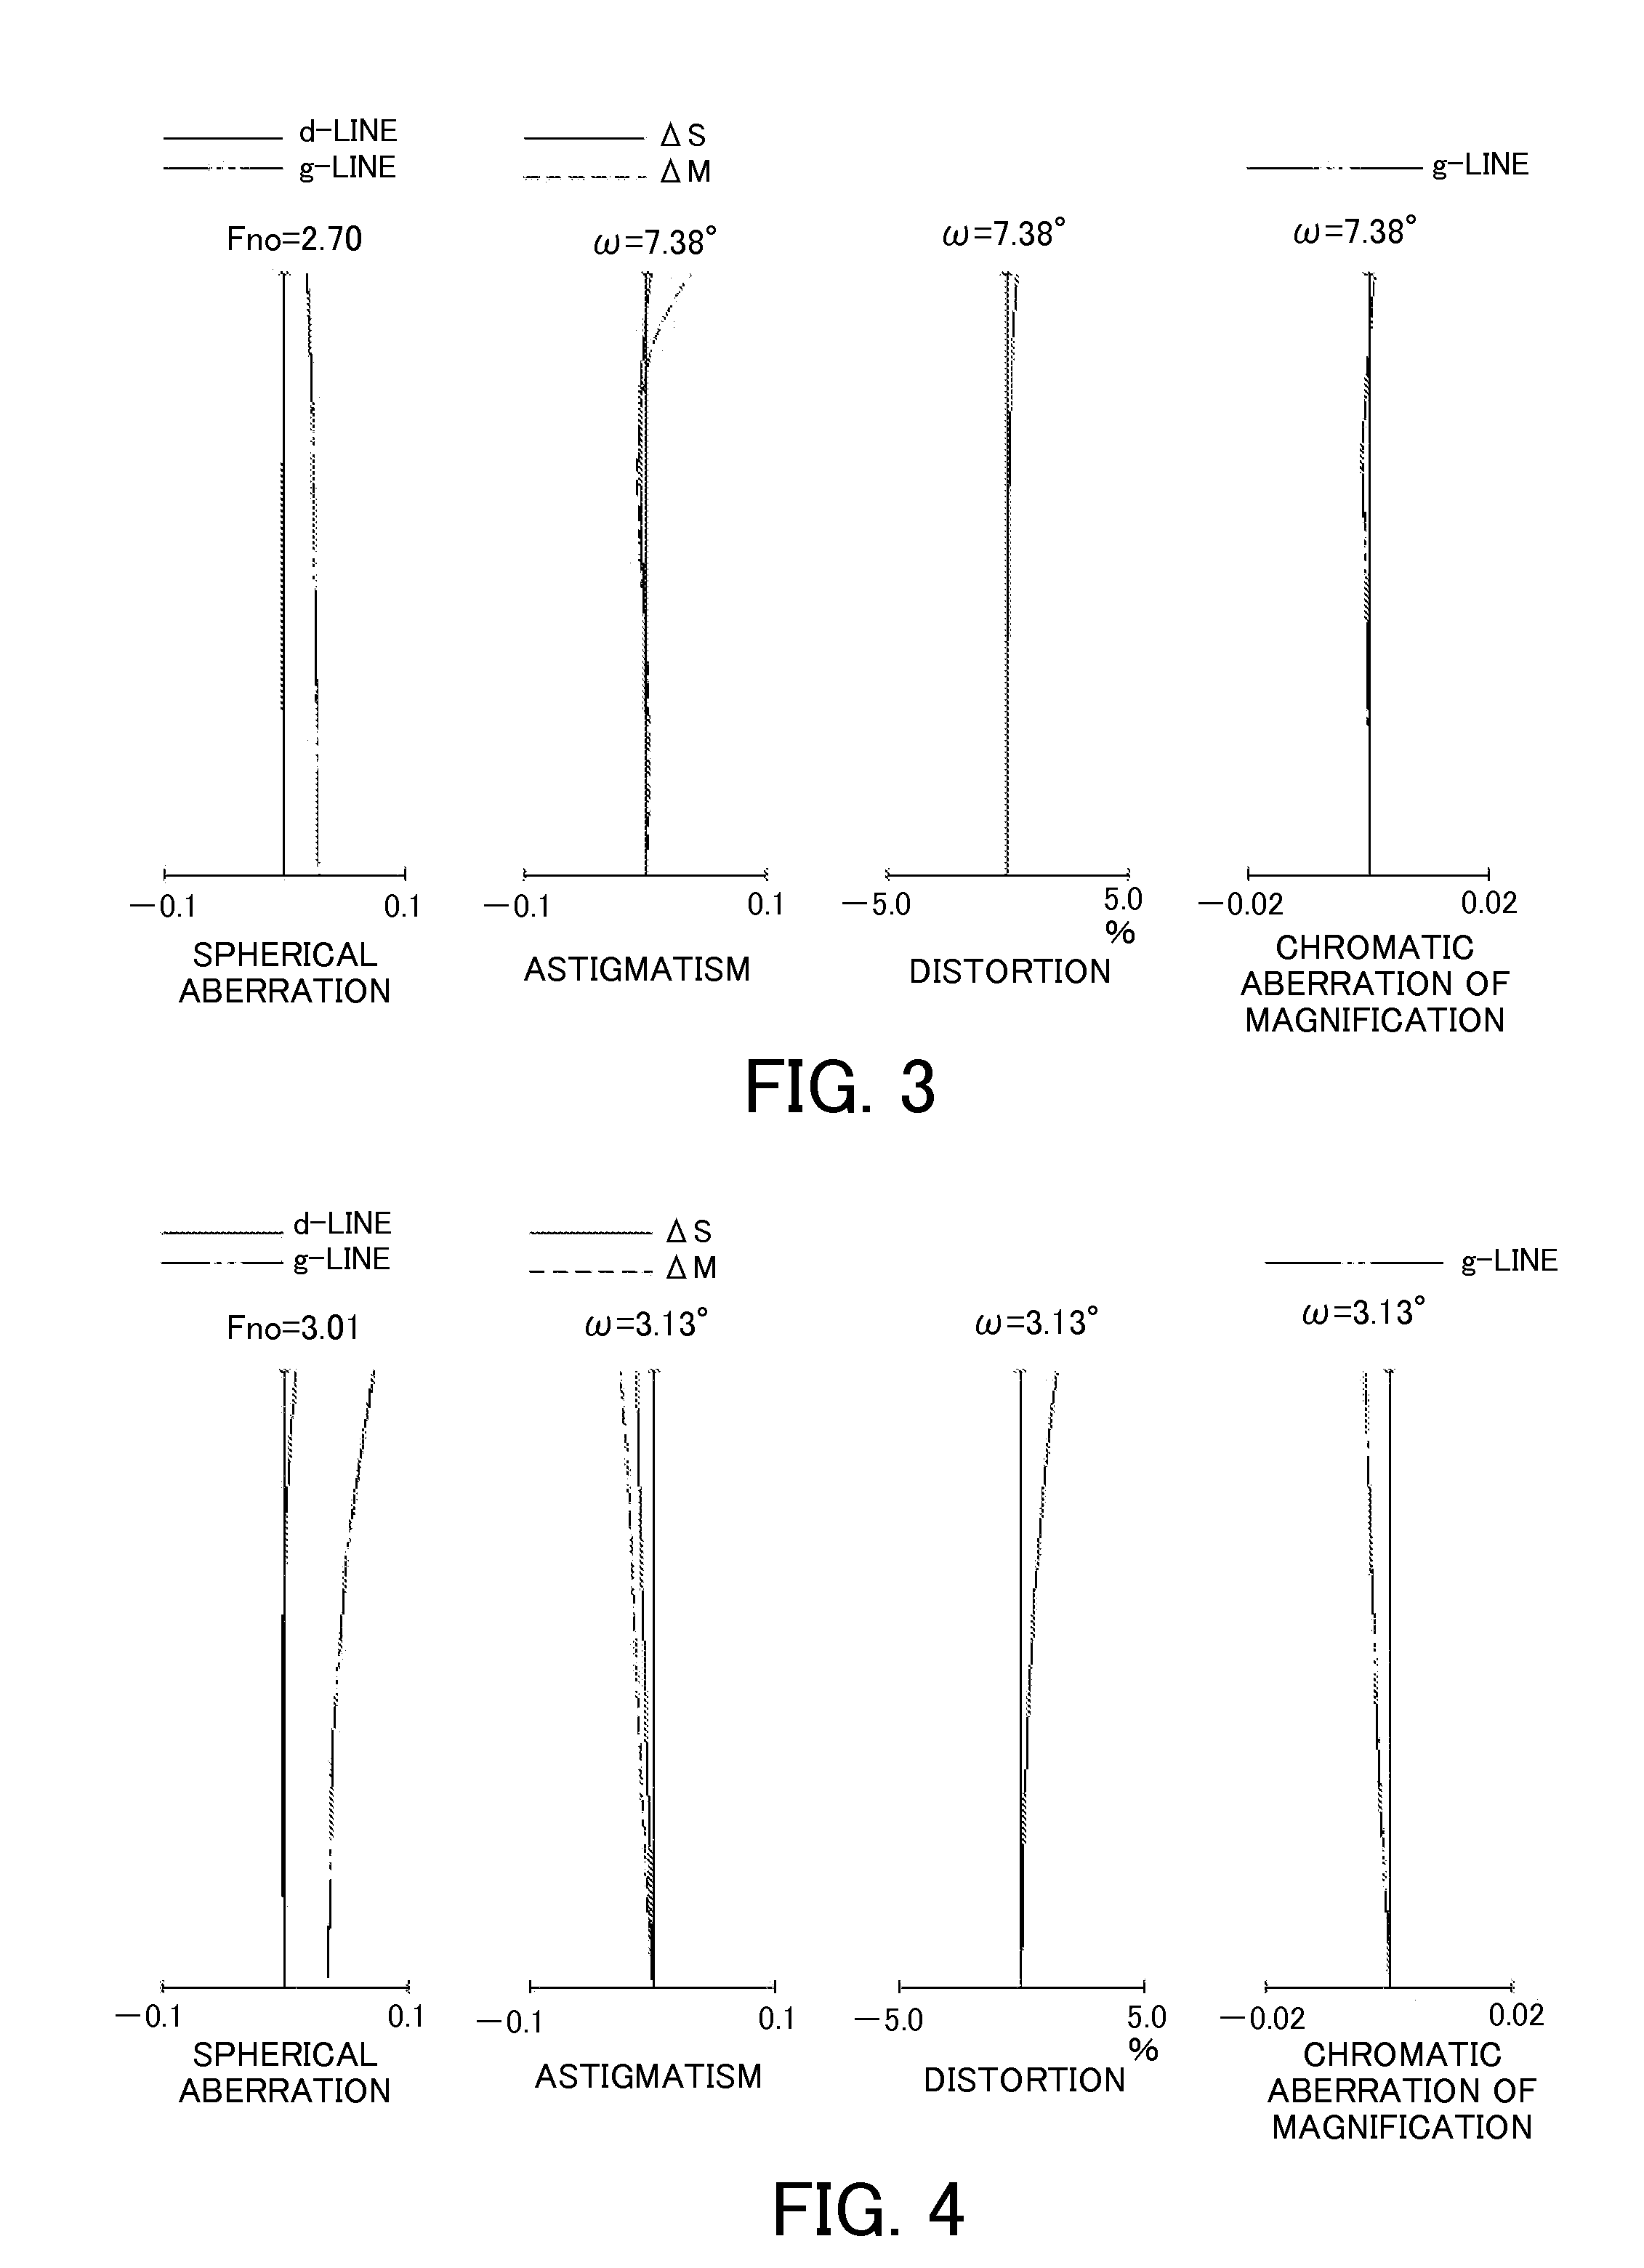 Zoom lens and image-pickup apparatus